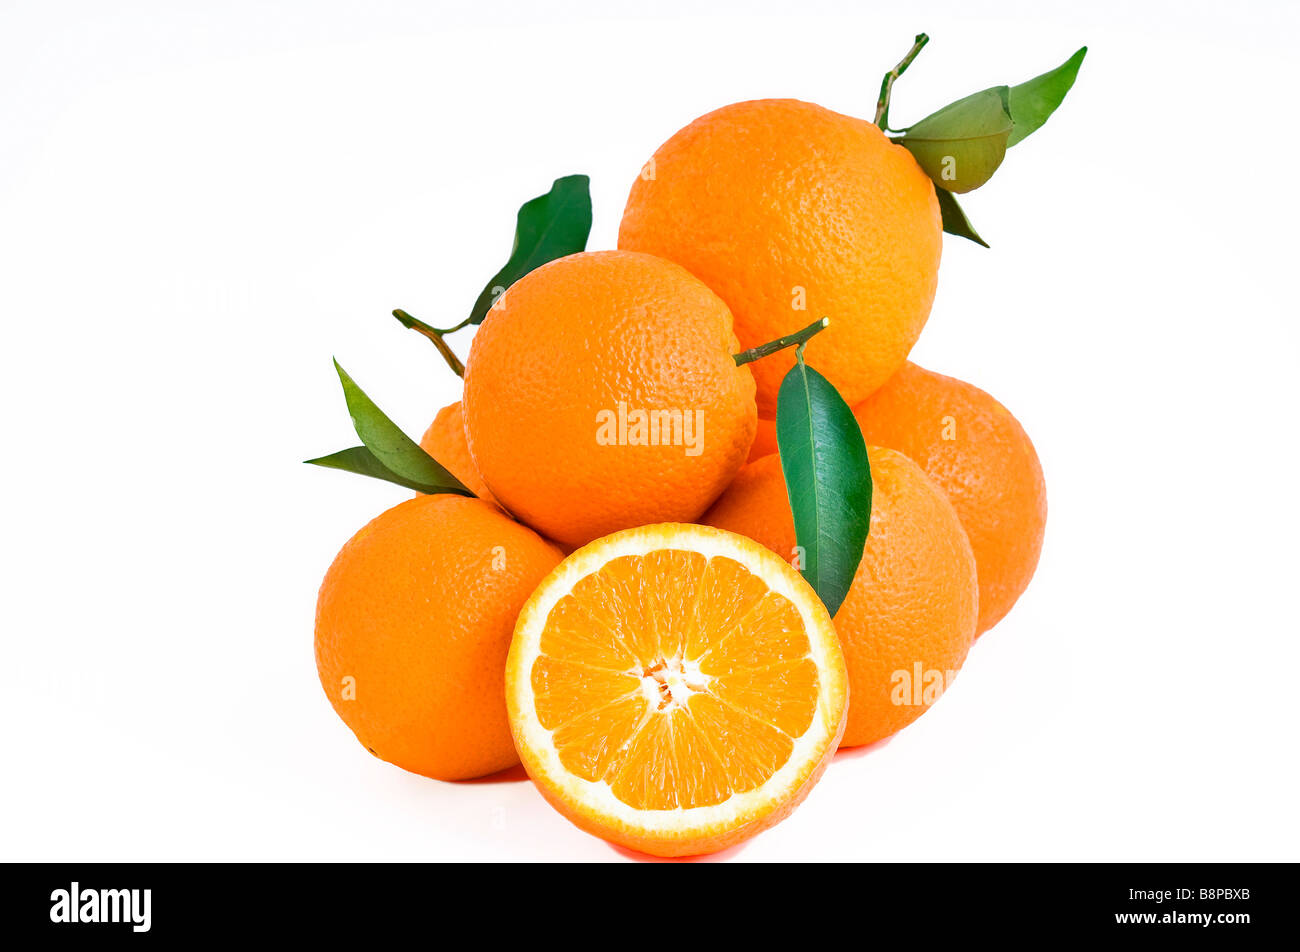 Pile of fresh juicy oranges with green leaves isolated on white background and one cut orange Stock Photo